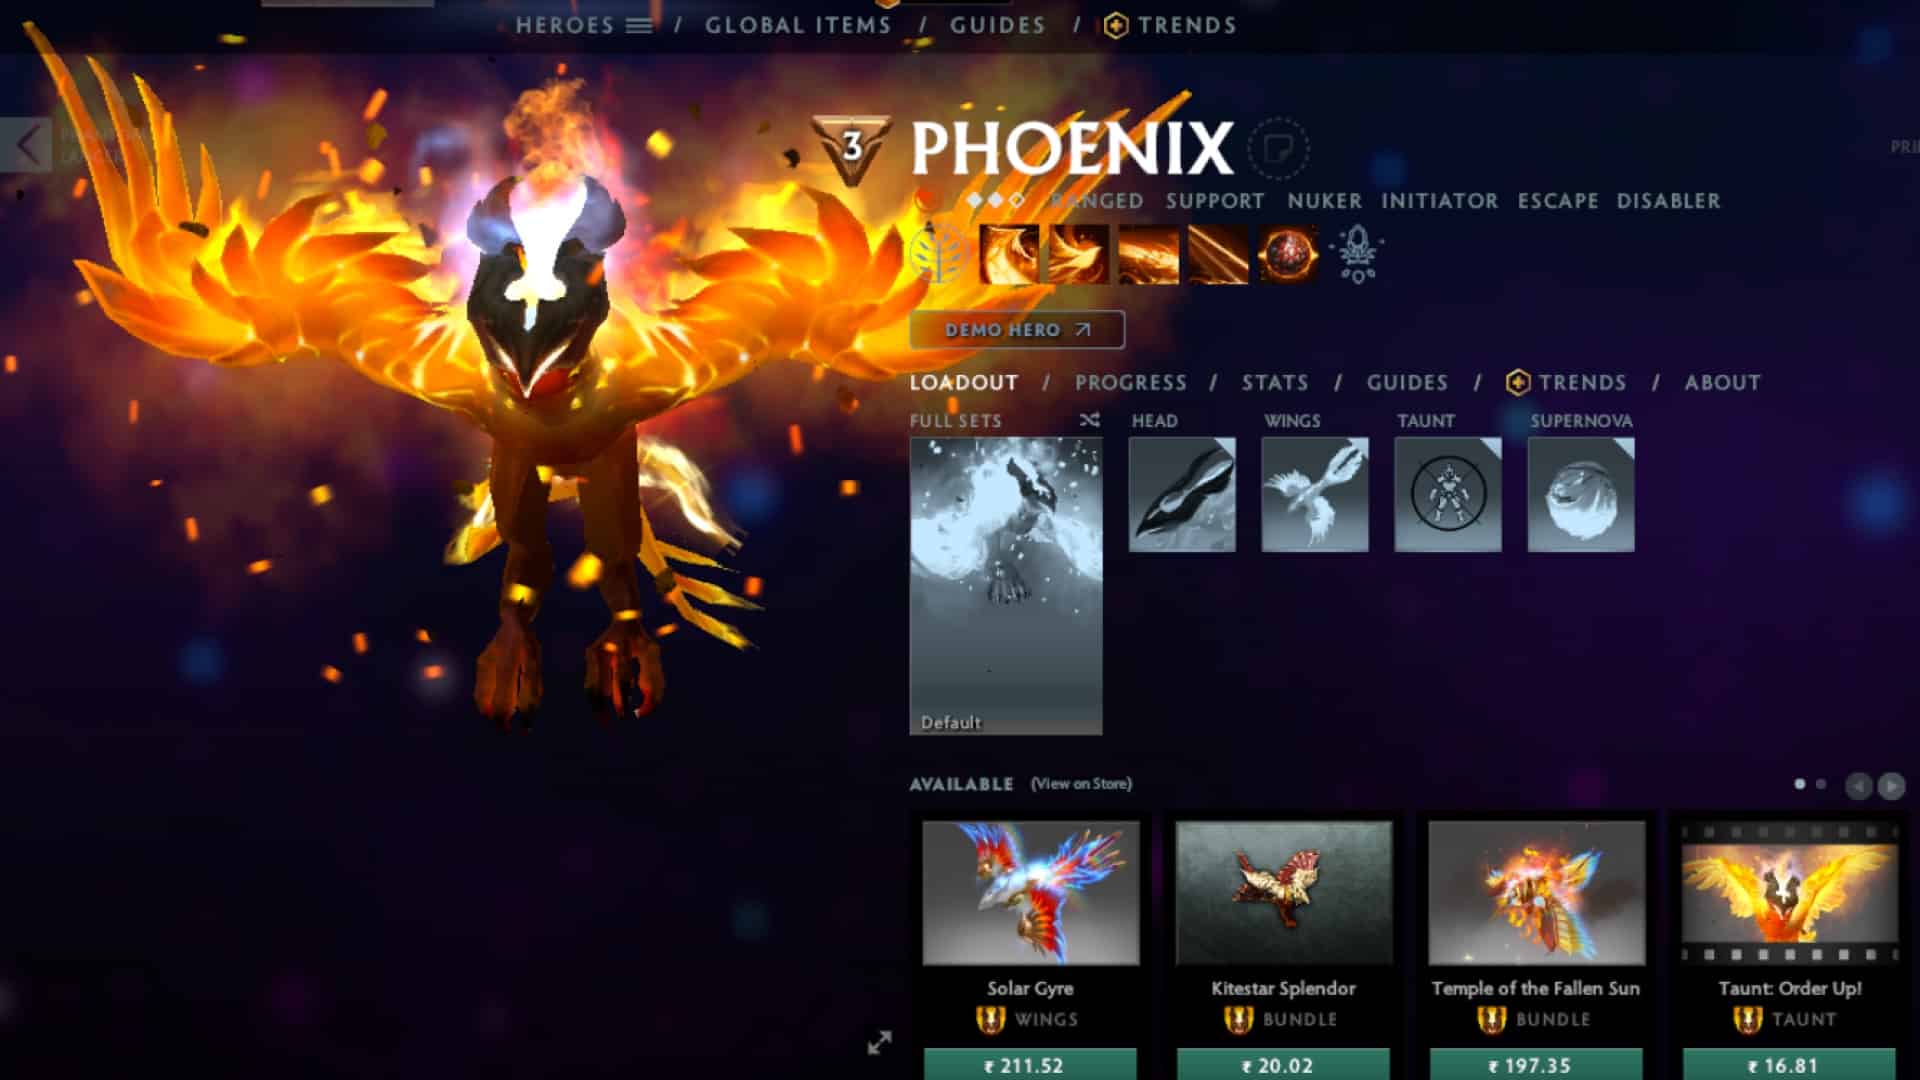 Phoenix dives into battle to assist Treant Protector